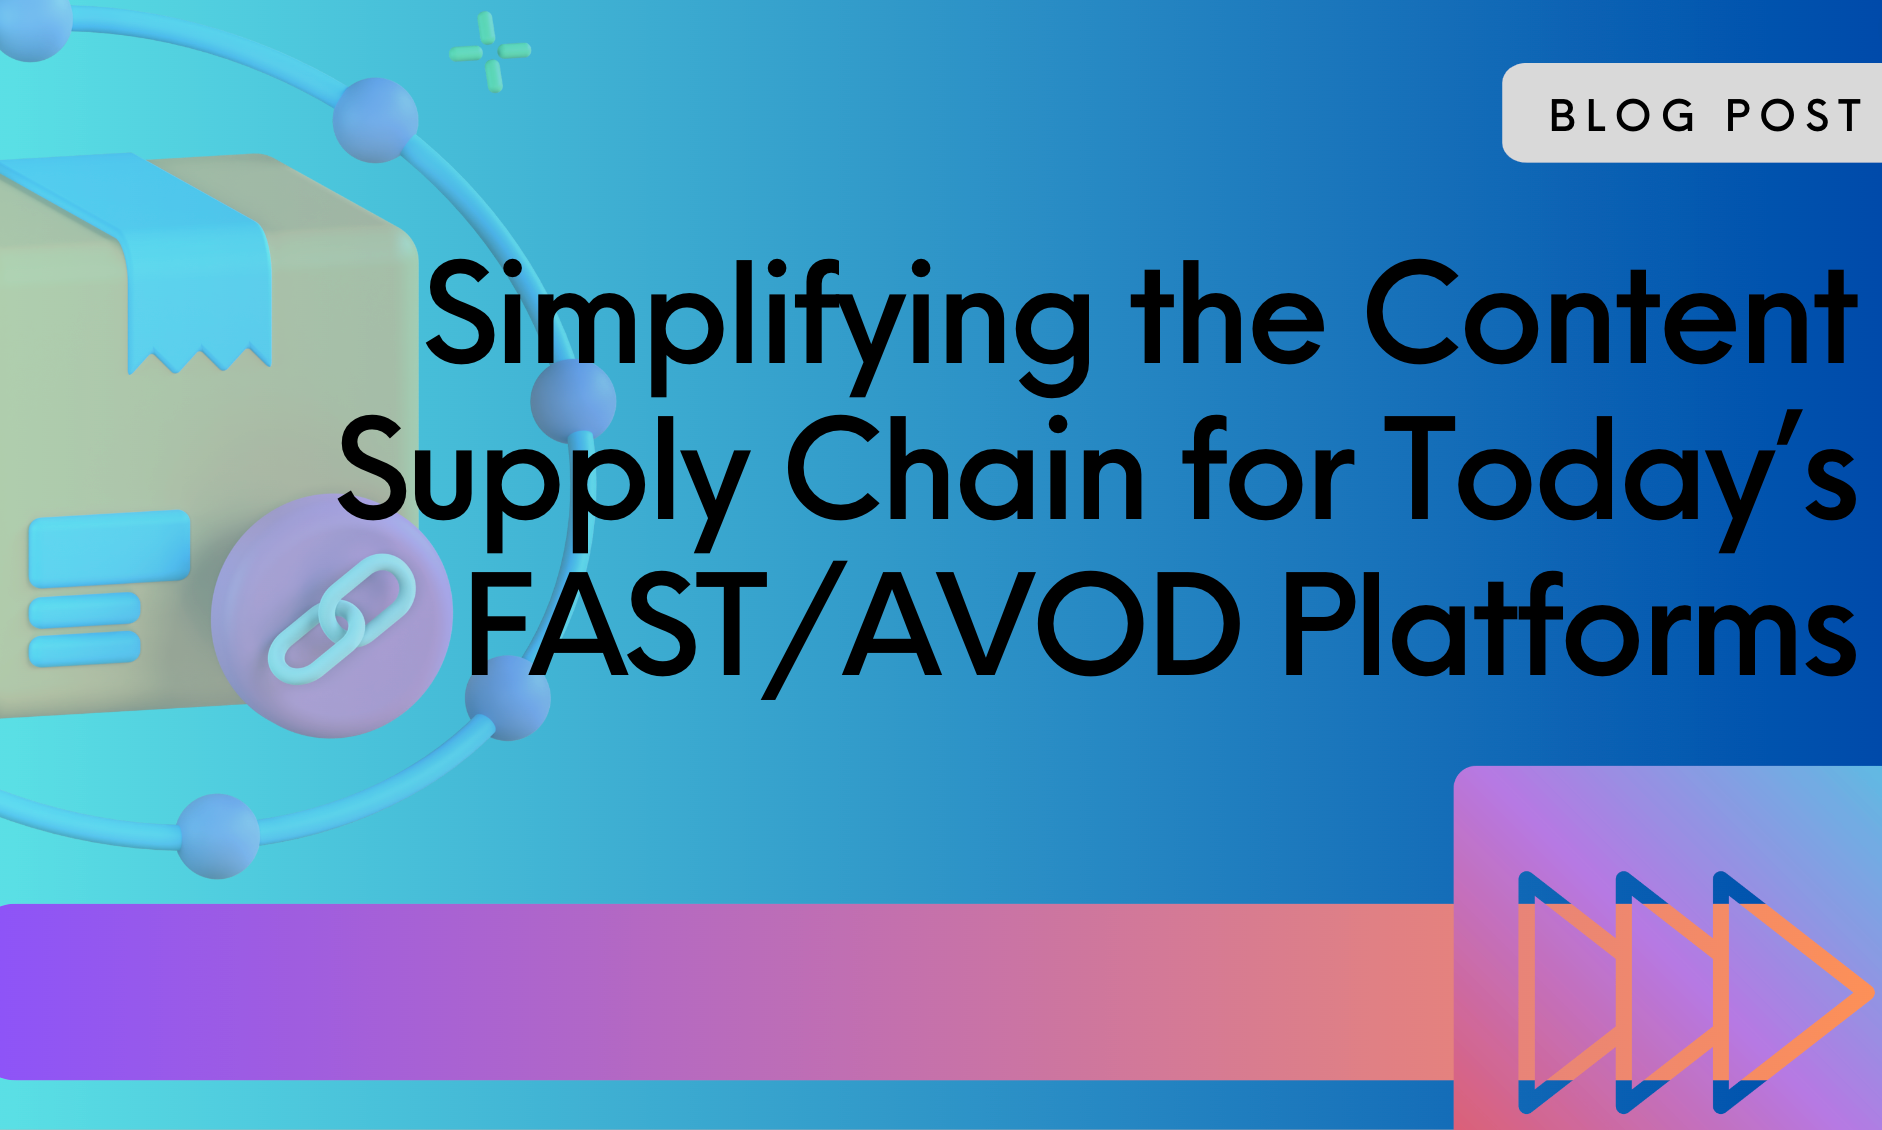 Simplifying the Content Supply Chain for Todays FAST and AVOD Platforms